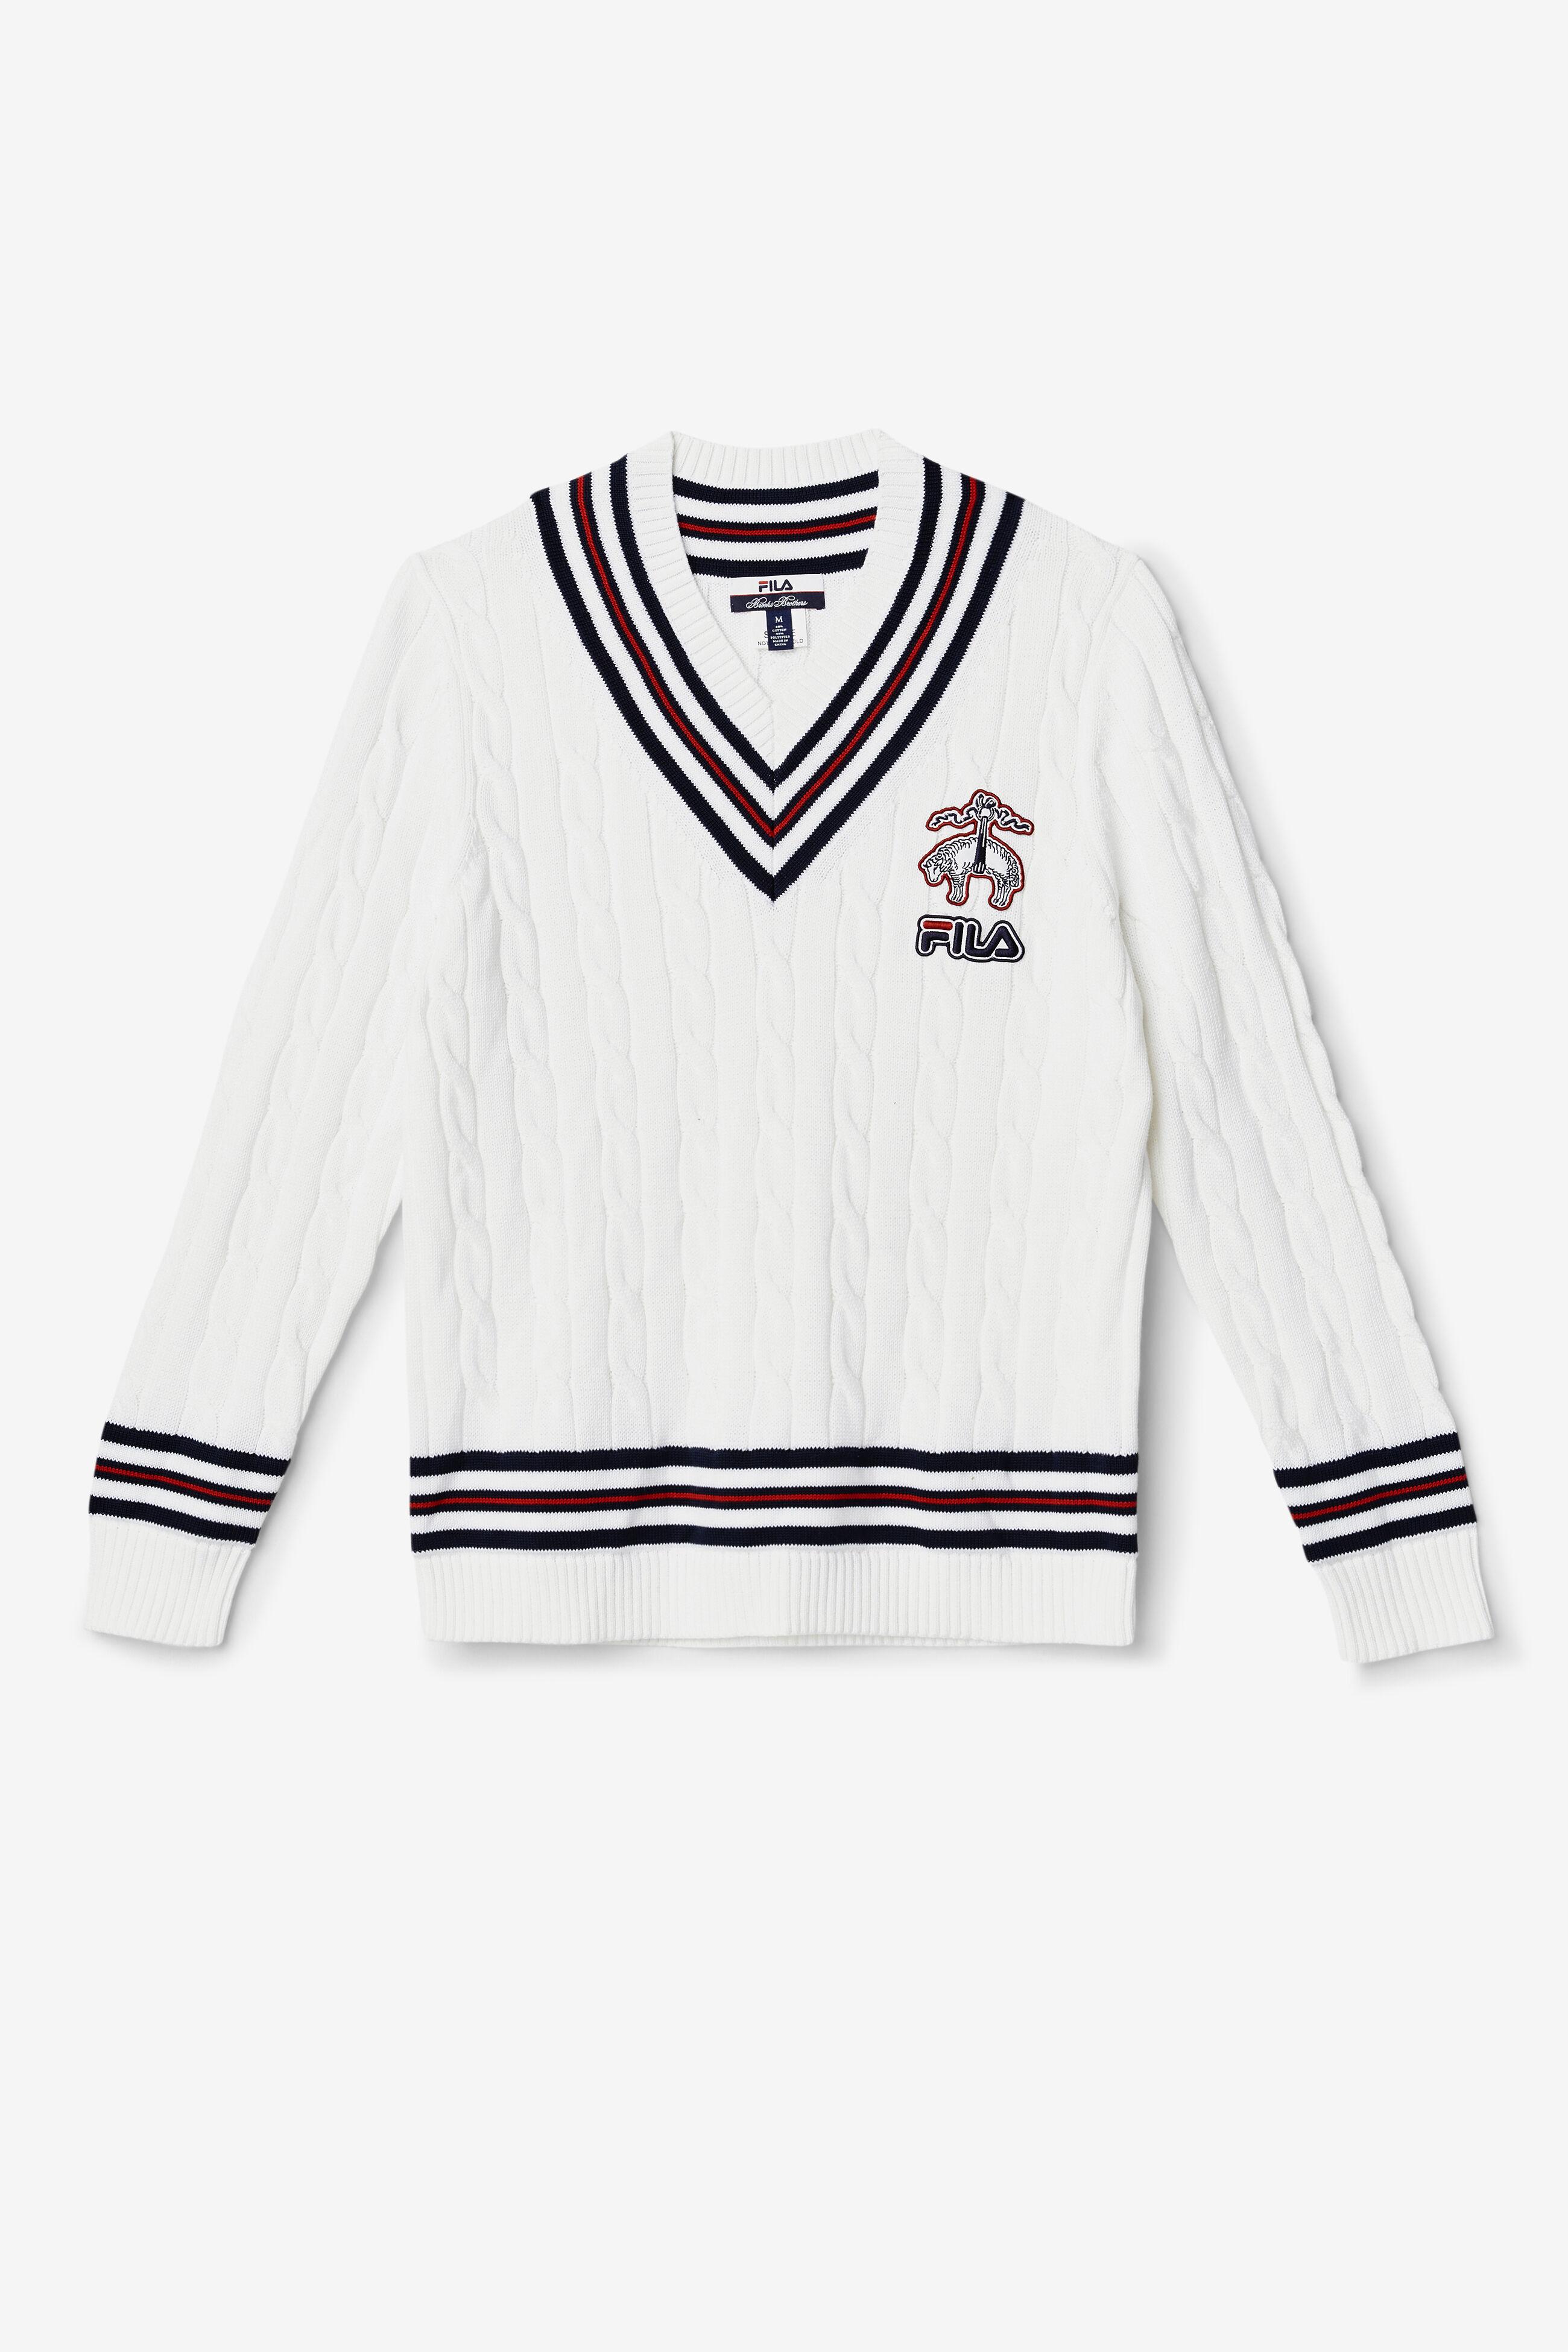 Fila Brooks Brothers X Lawn Tennis Sweater in White | Lyst